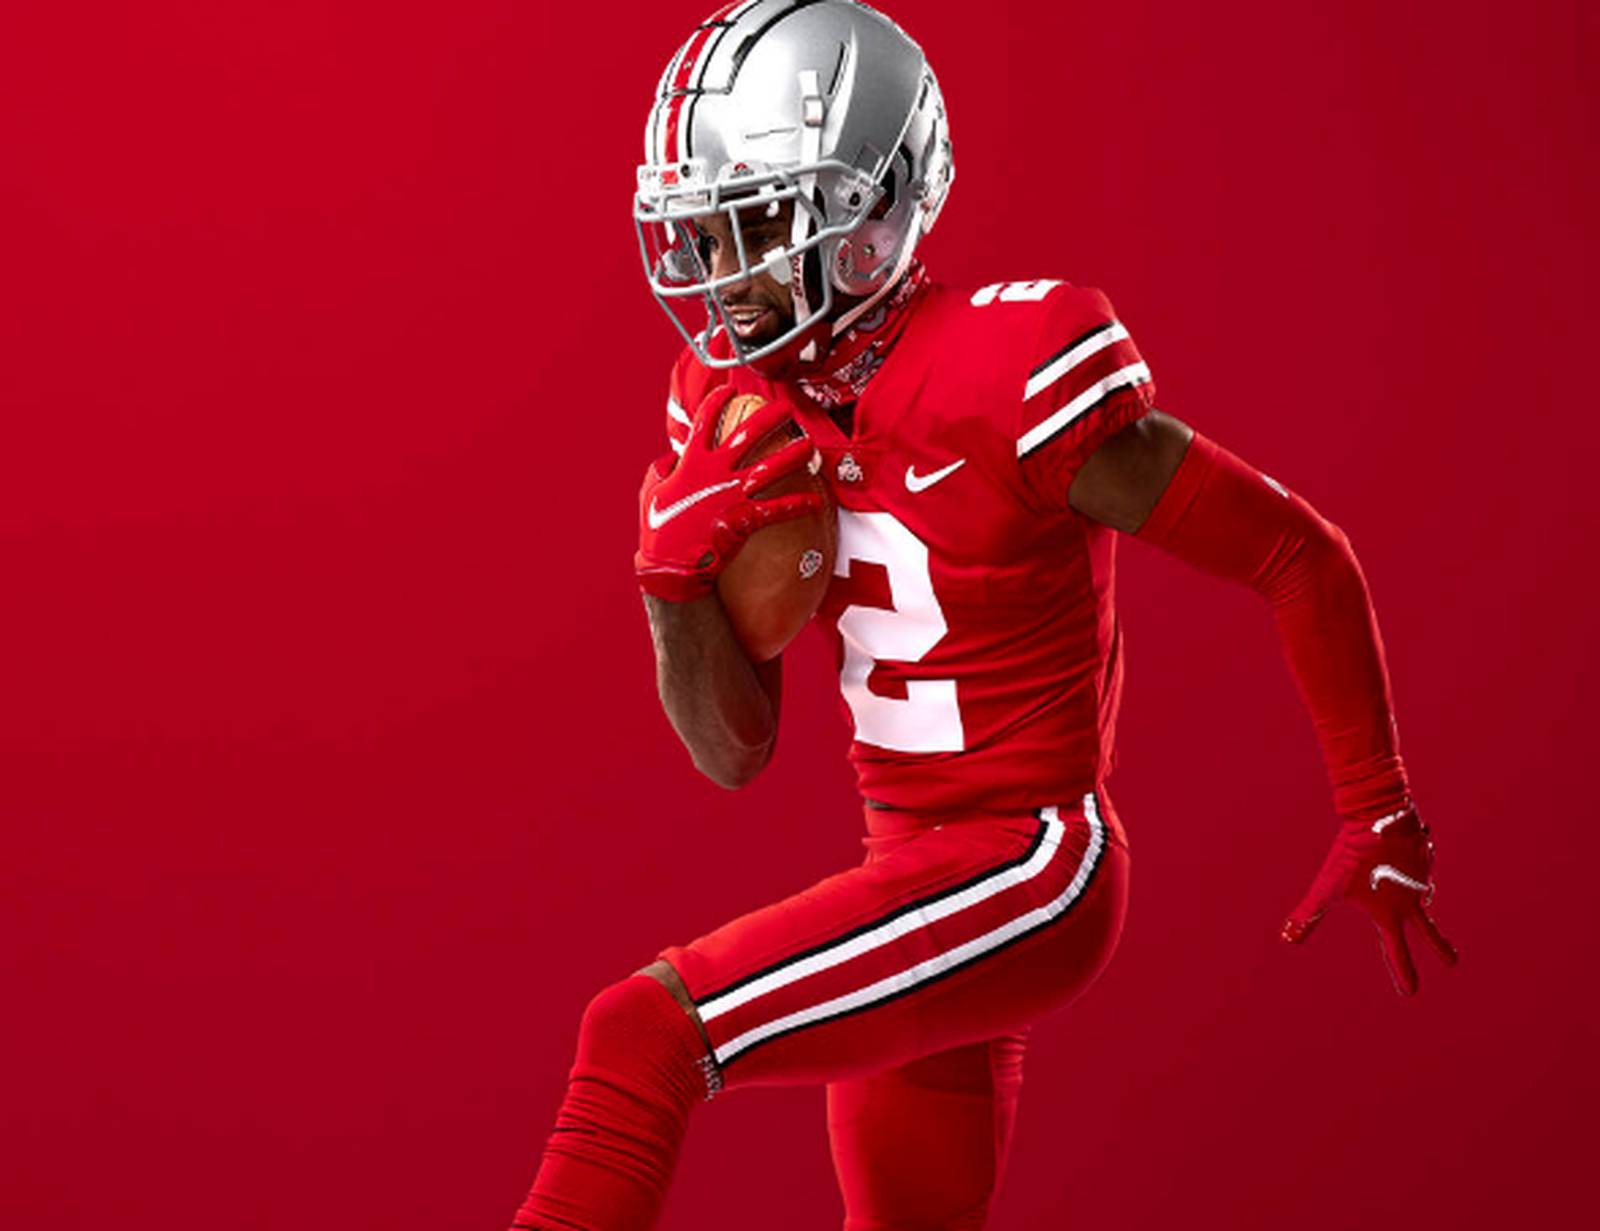 Ohio State introduces new ‘color rush’ uniform for Penn State game ...